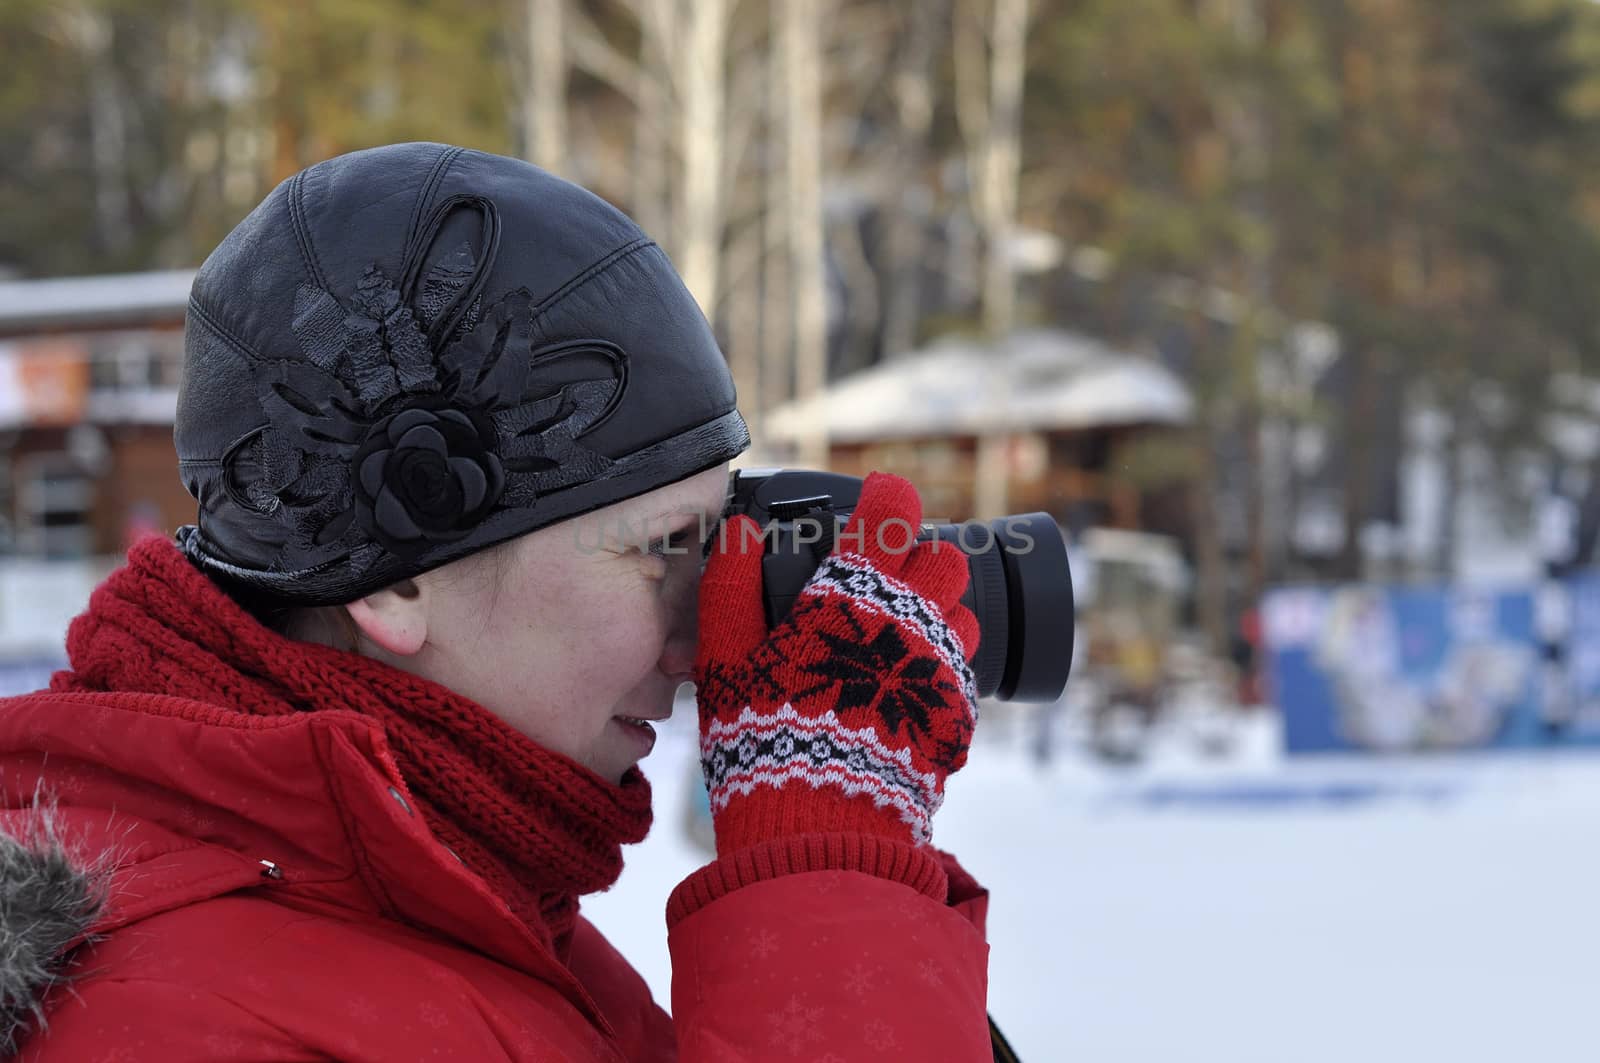 The woman in winter clothes photographs the SLR camera. by veronka72